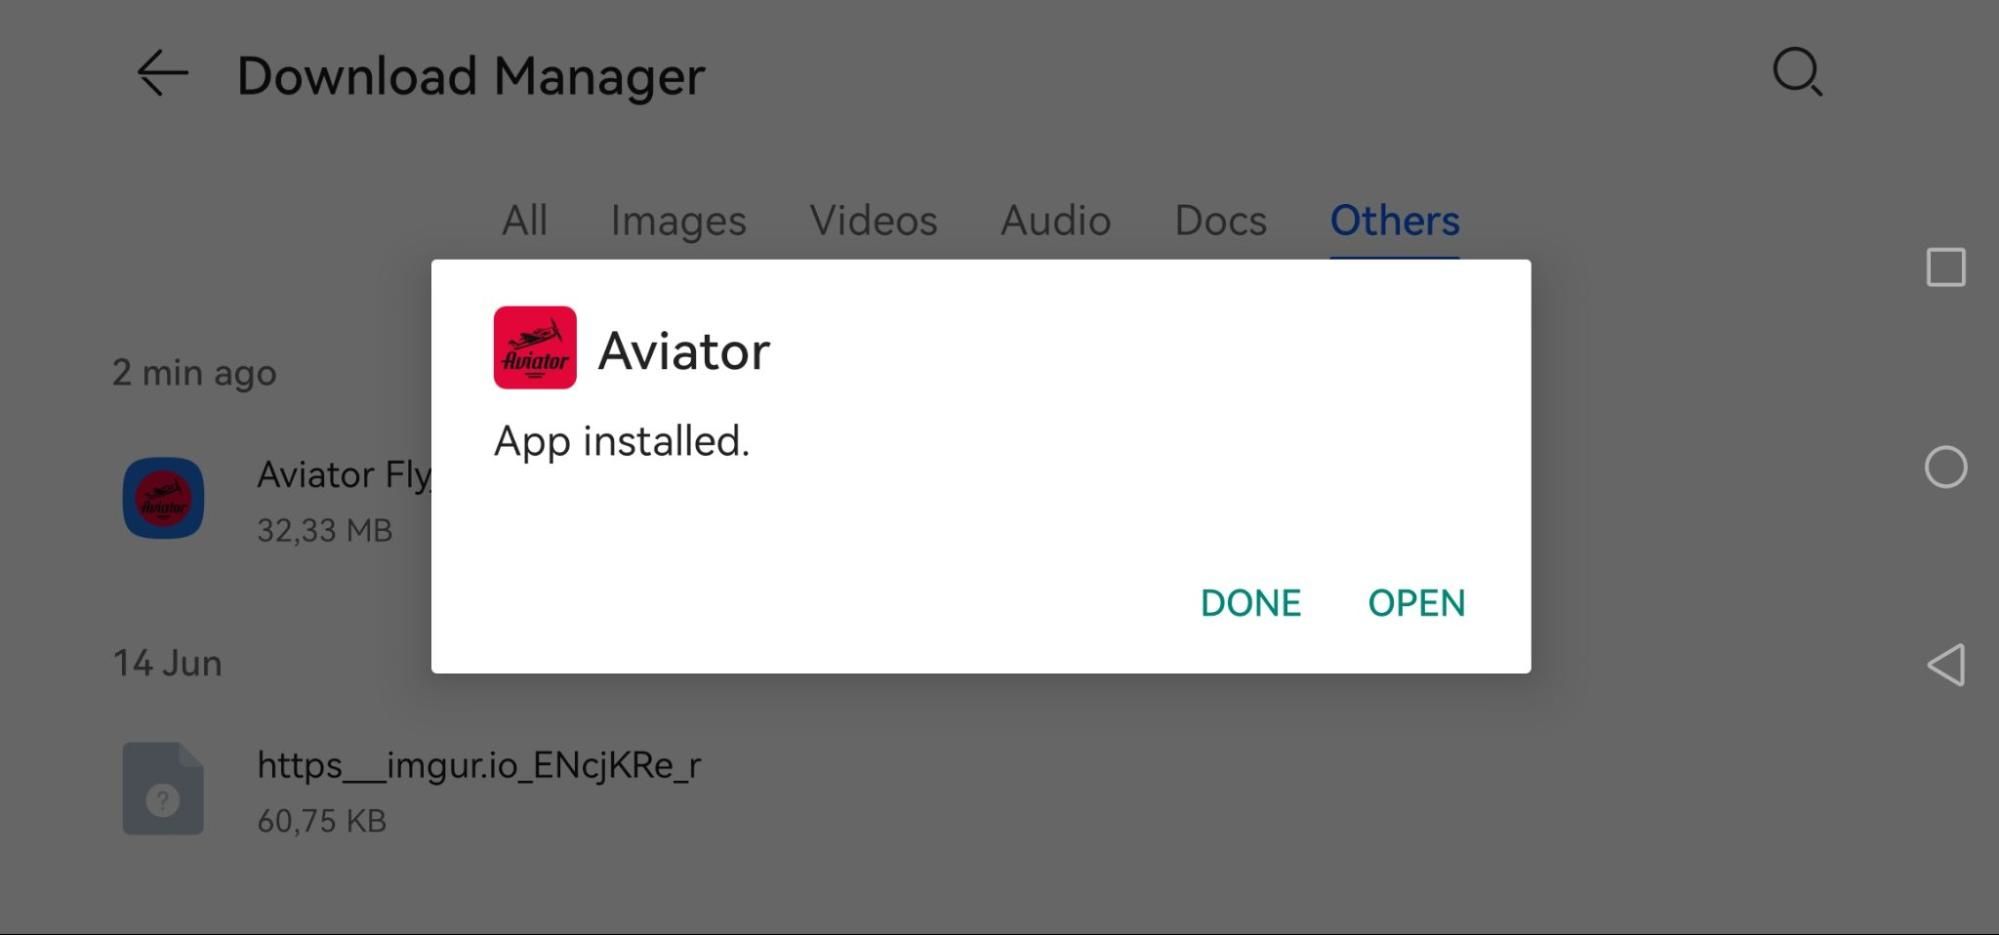 Launch the Aviator Application